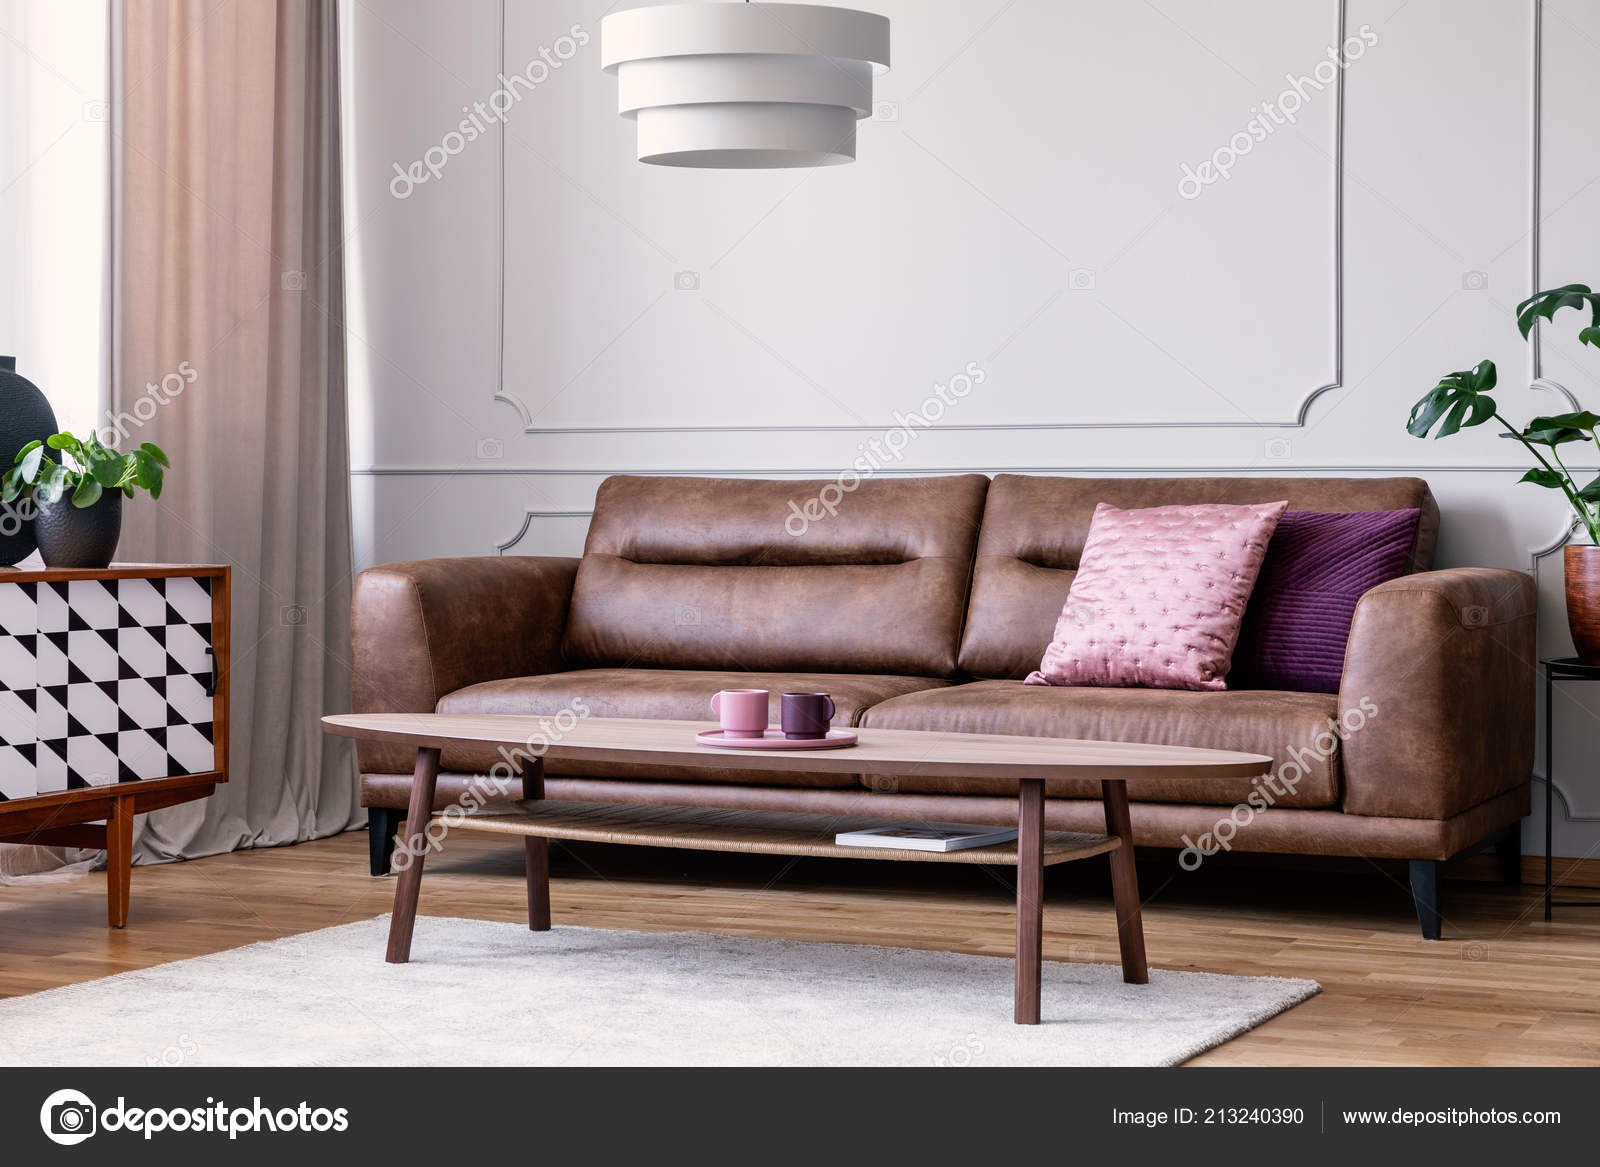 Pillows Leather Couch Retro Living Room Interior Lamp Wooden Table Stock Photo Photographeeeu 213240390